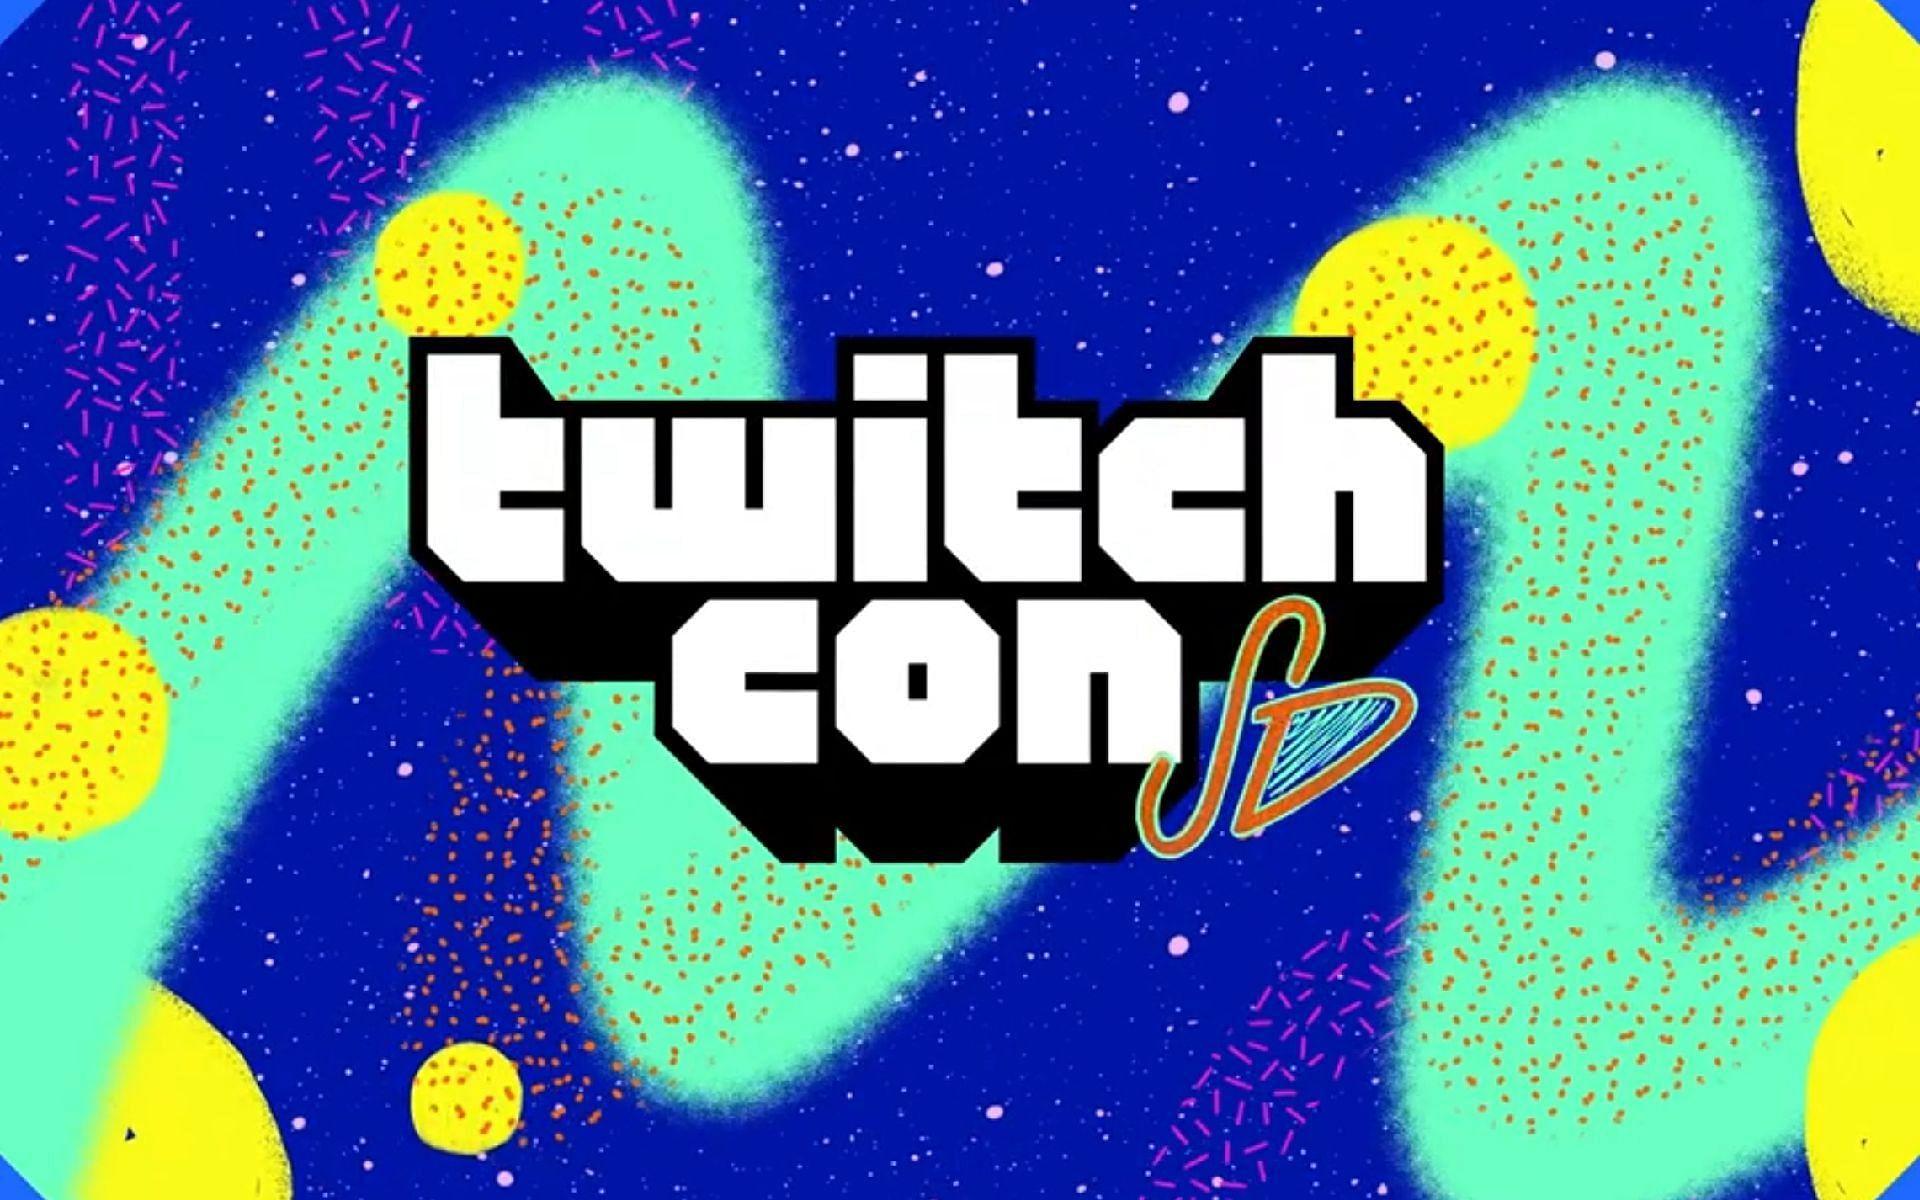 How to watch TwitchCon 2022 live Dates, livestream details, and more